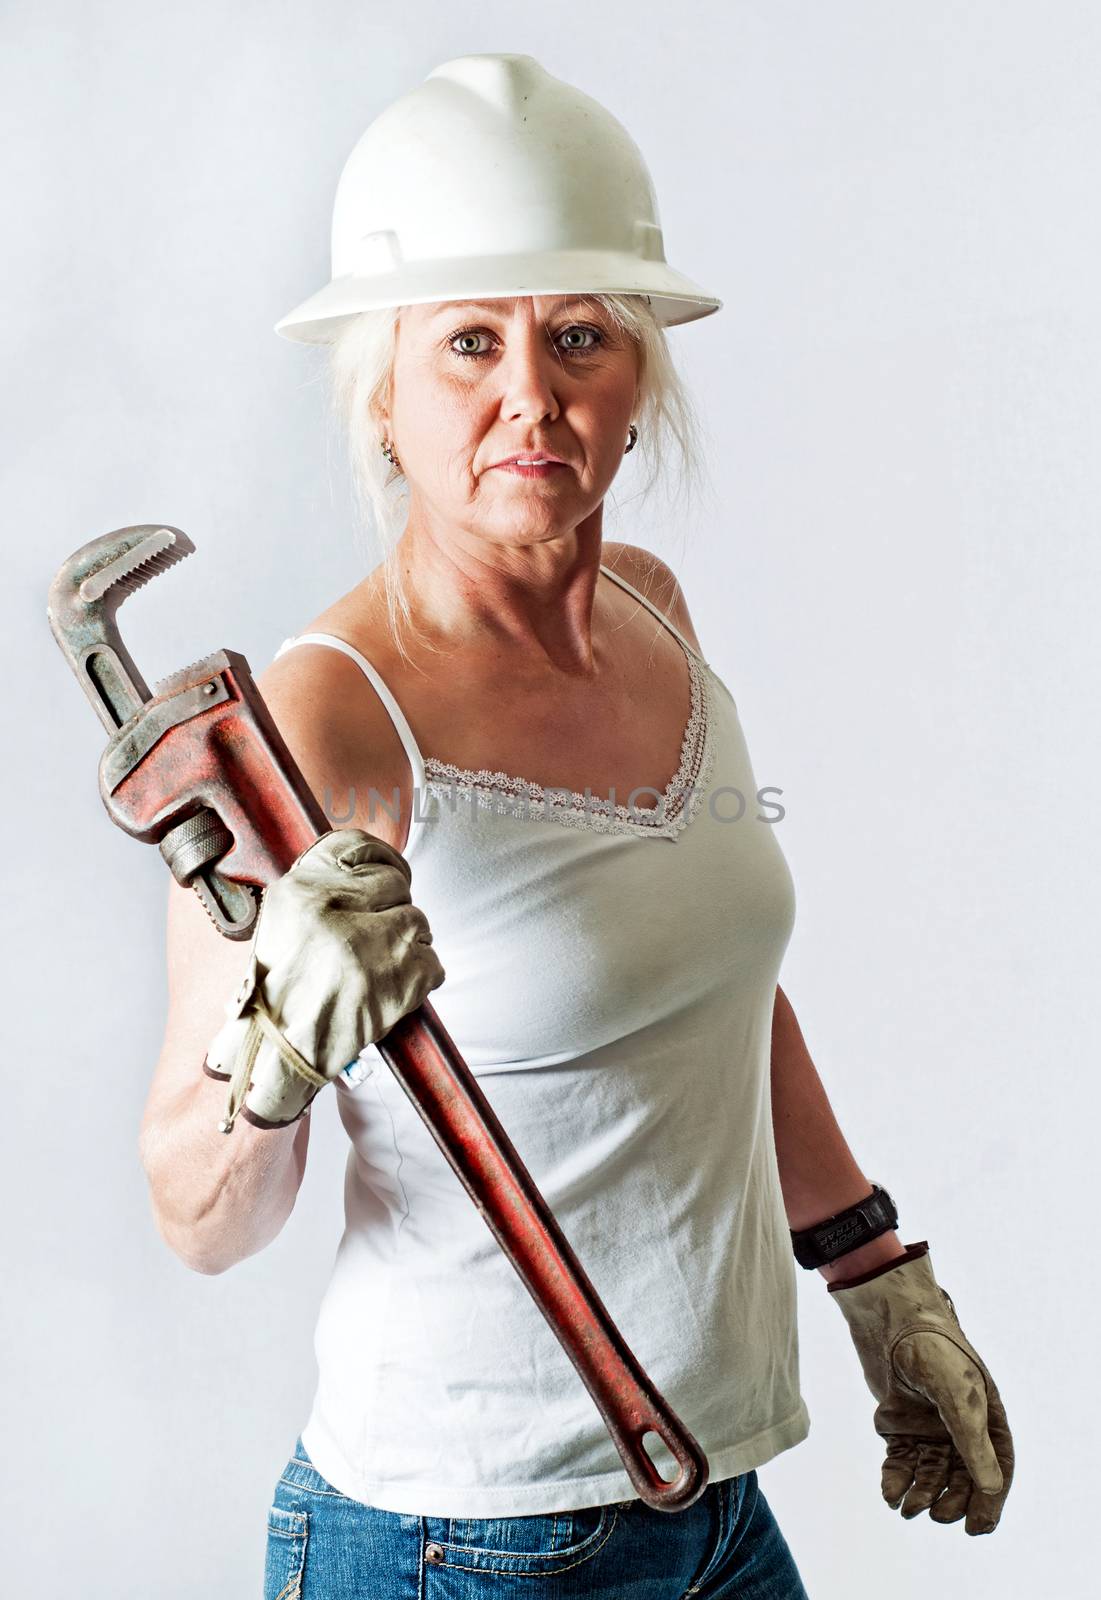 Woman Plumber Holding A Pipe Wrench by rcarner